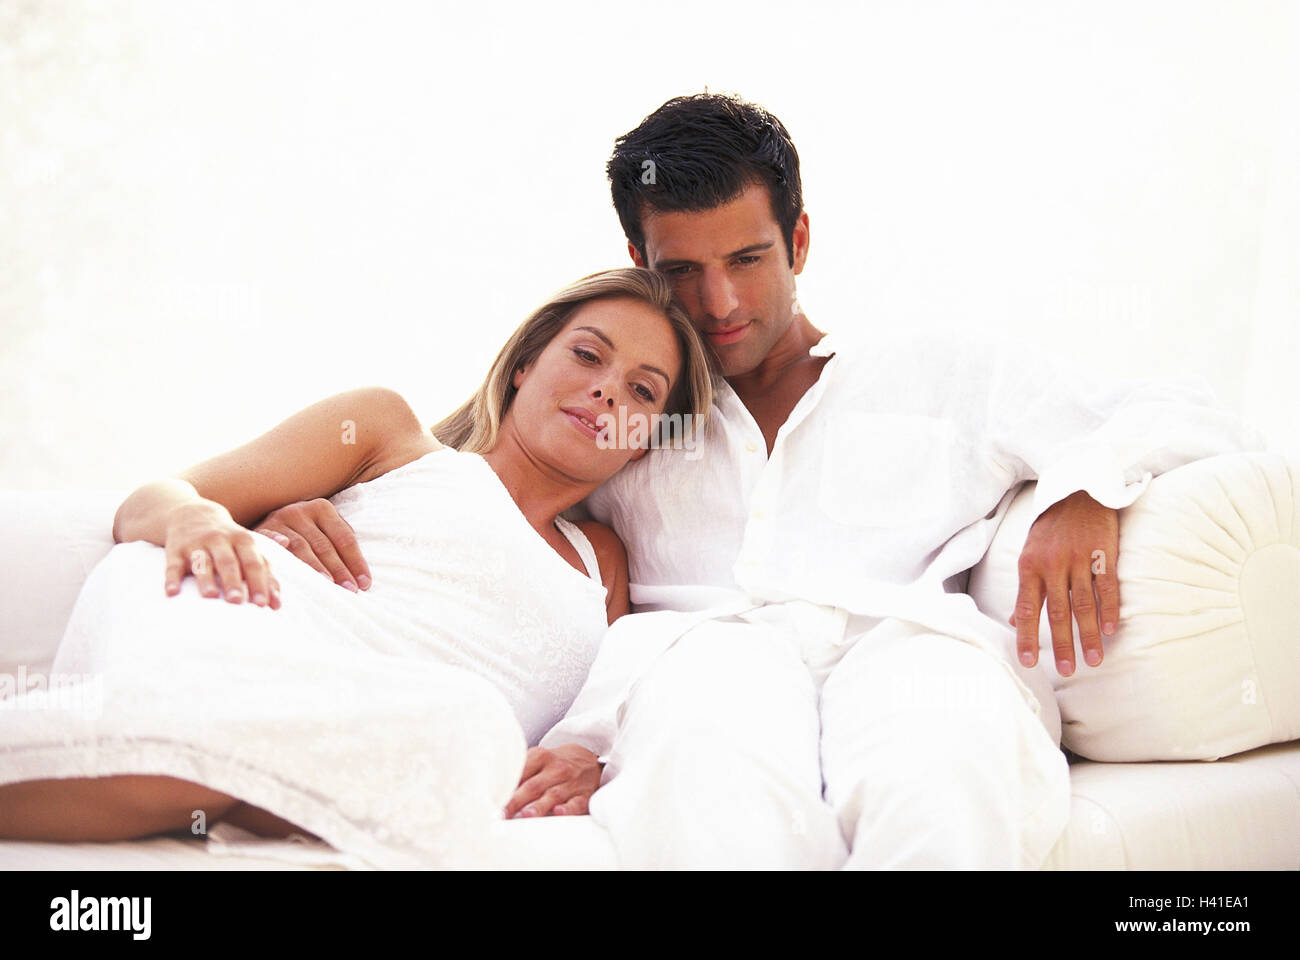 Sofa, pair, happily, falls in love, relaxen   28 years, 20-30 years, partnership, relationship, affection, love, tenderness, touch, nestles, recuperation, relaxation, togetherness, rests leisure time, weekend clothing knows Stock Photo